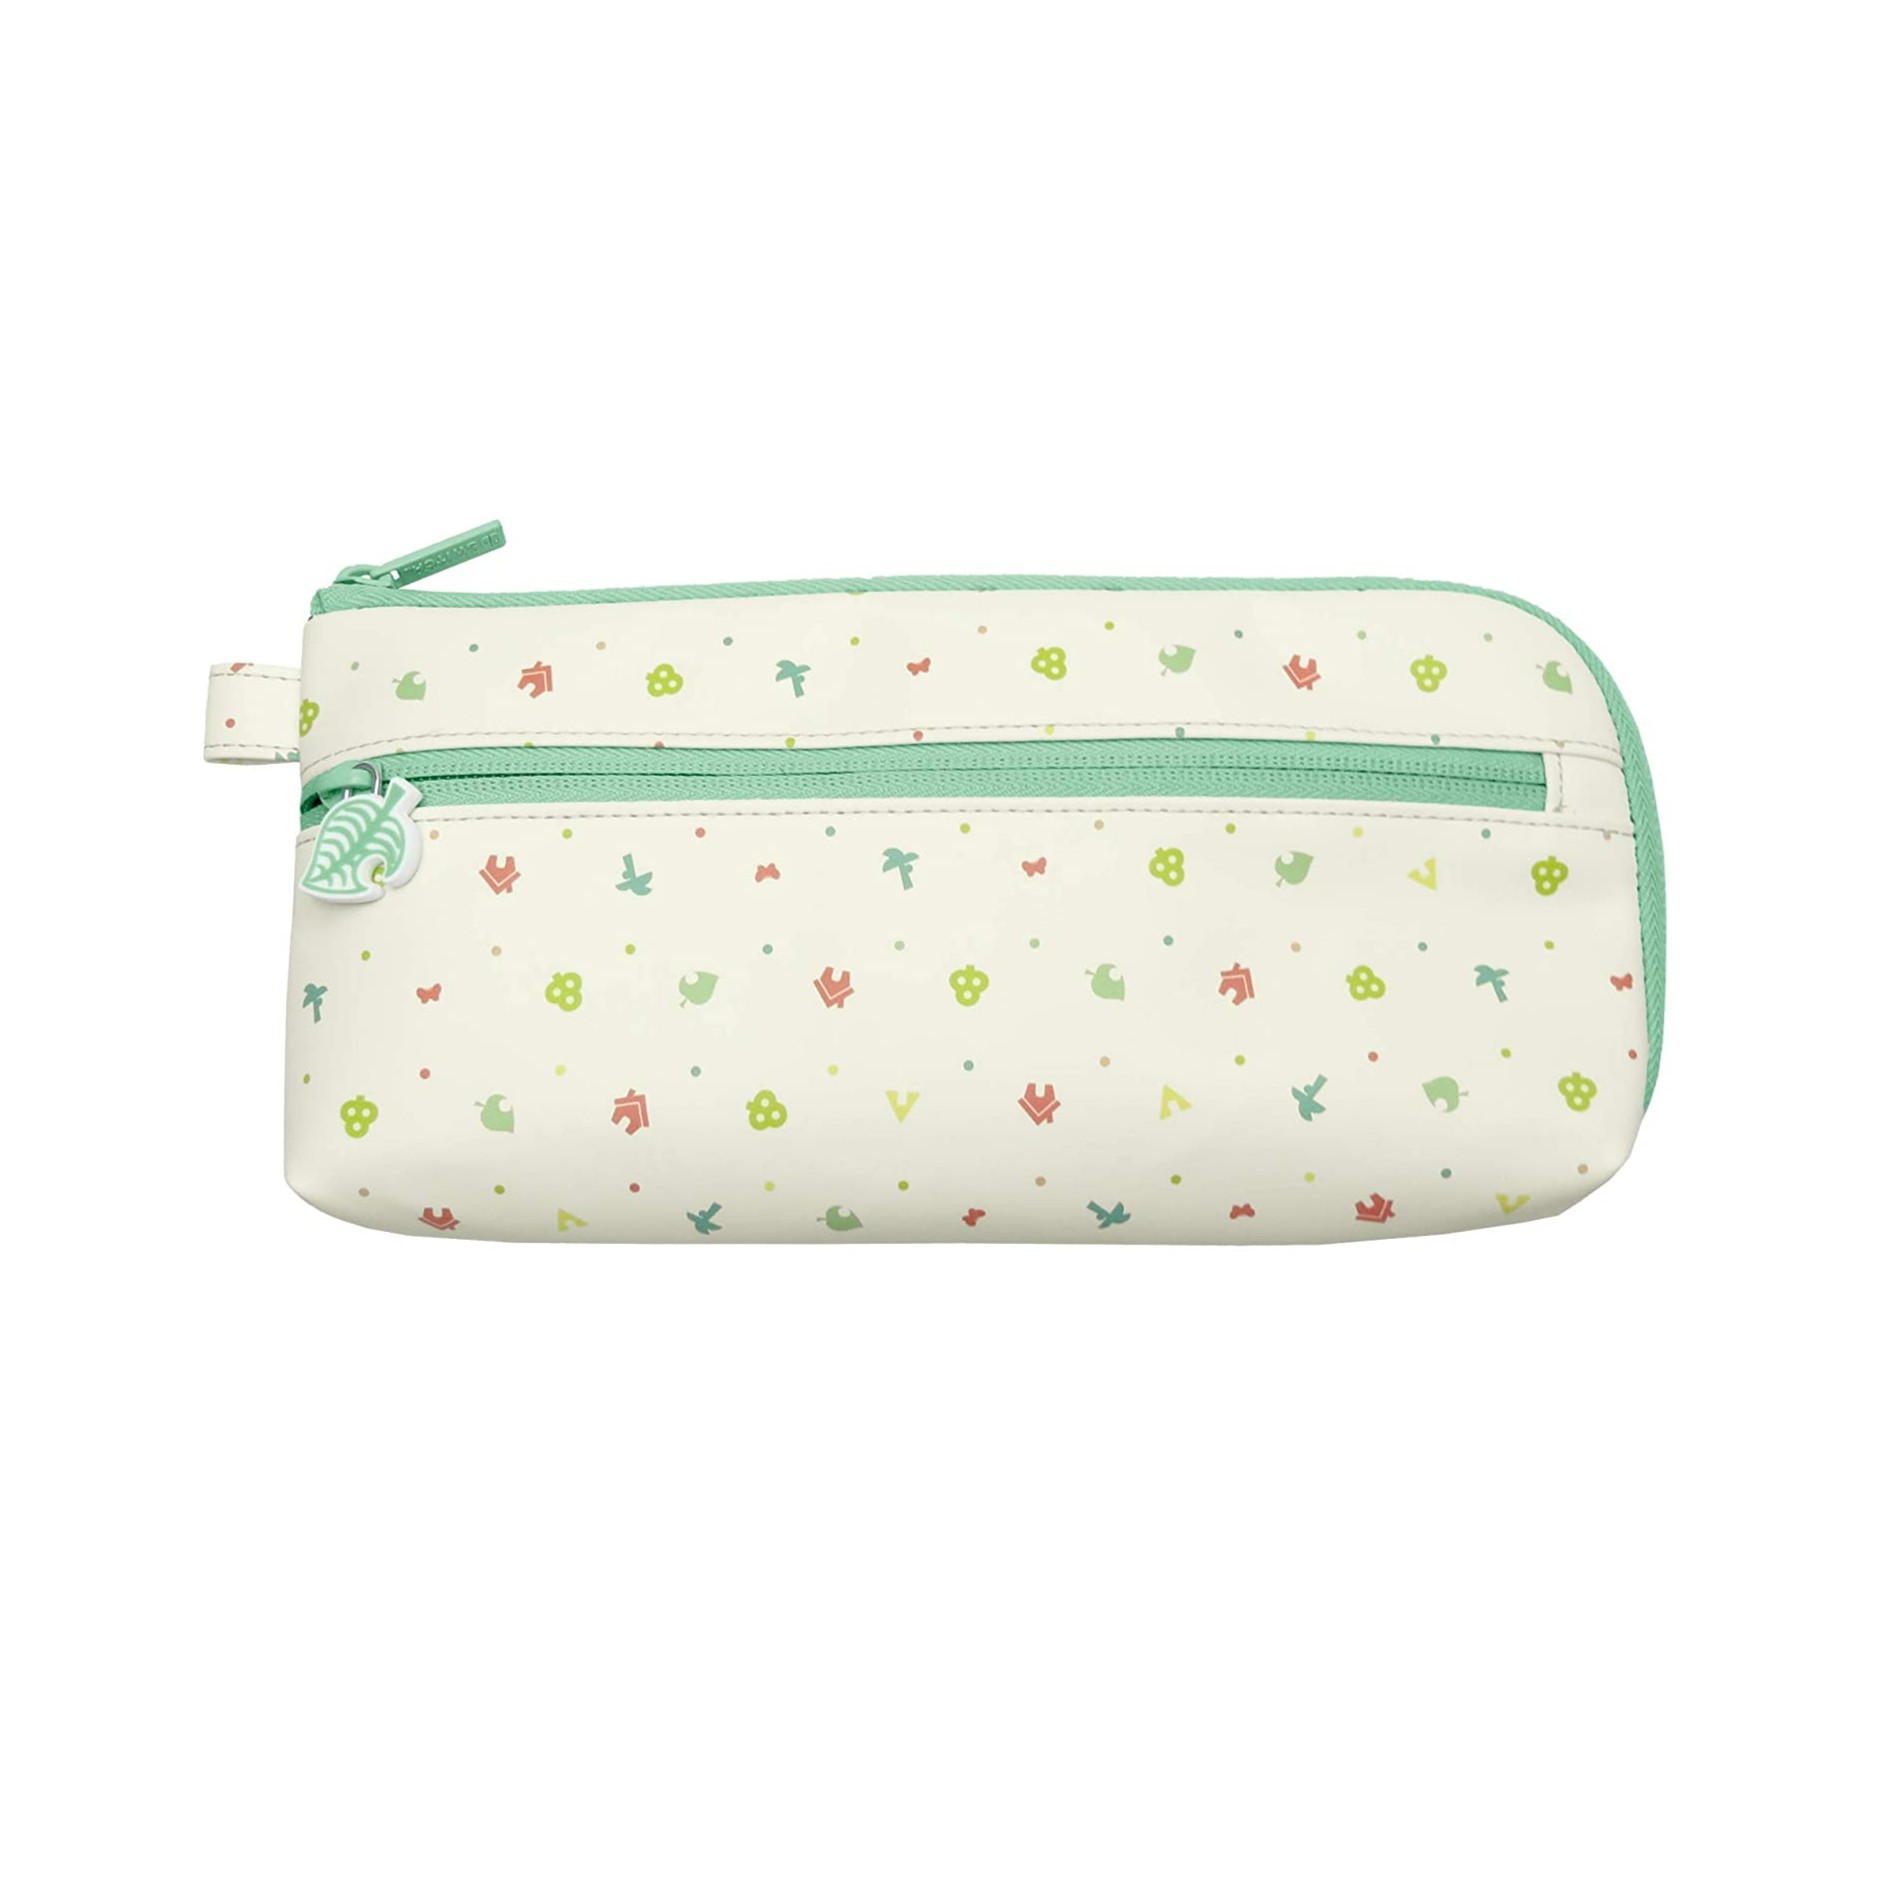 HORI Animal Crossing Hand Pouch (NSW-239) for Nintendo Switch